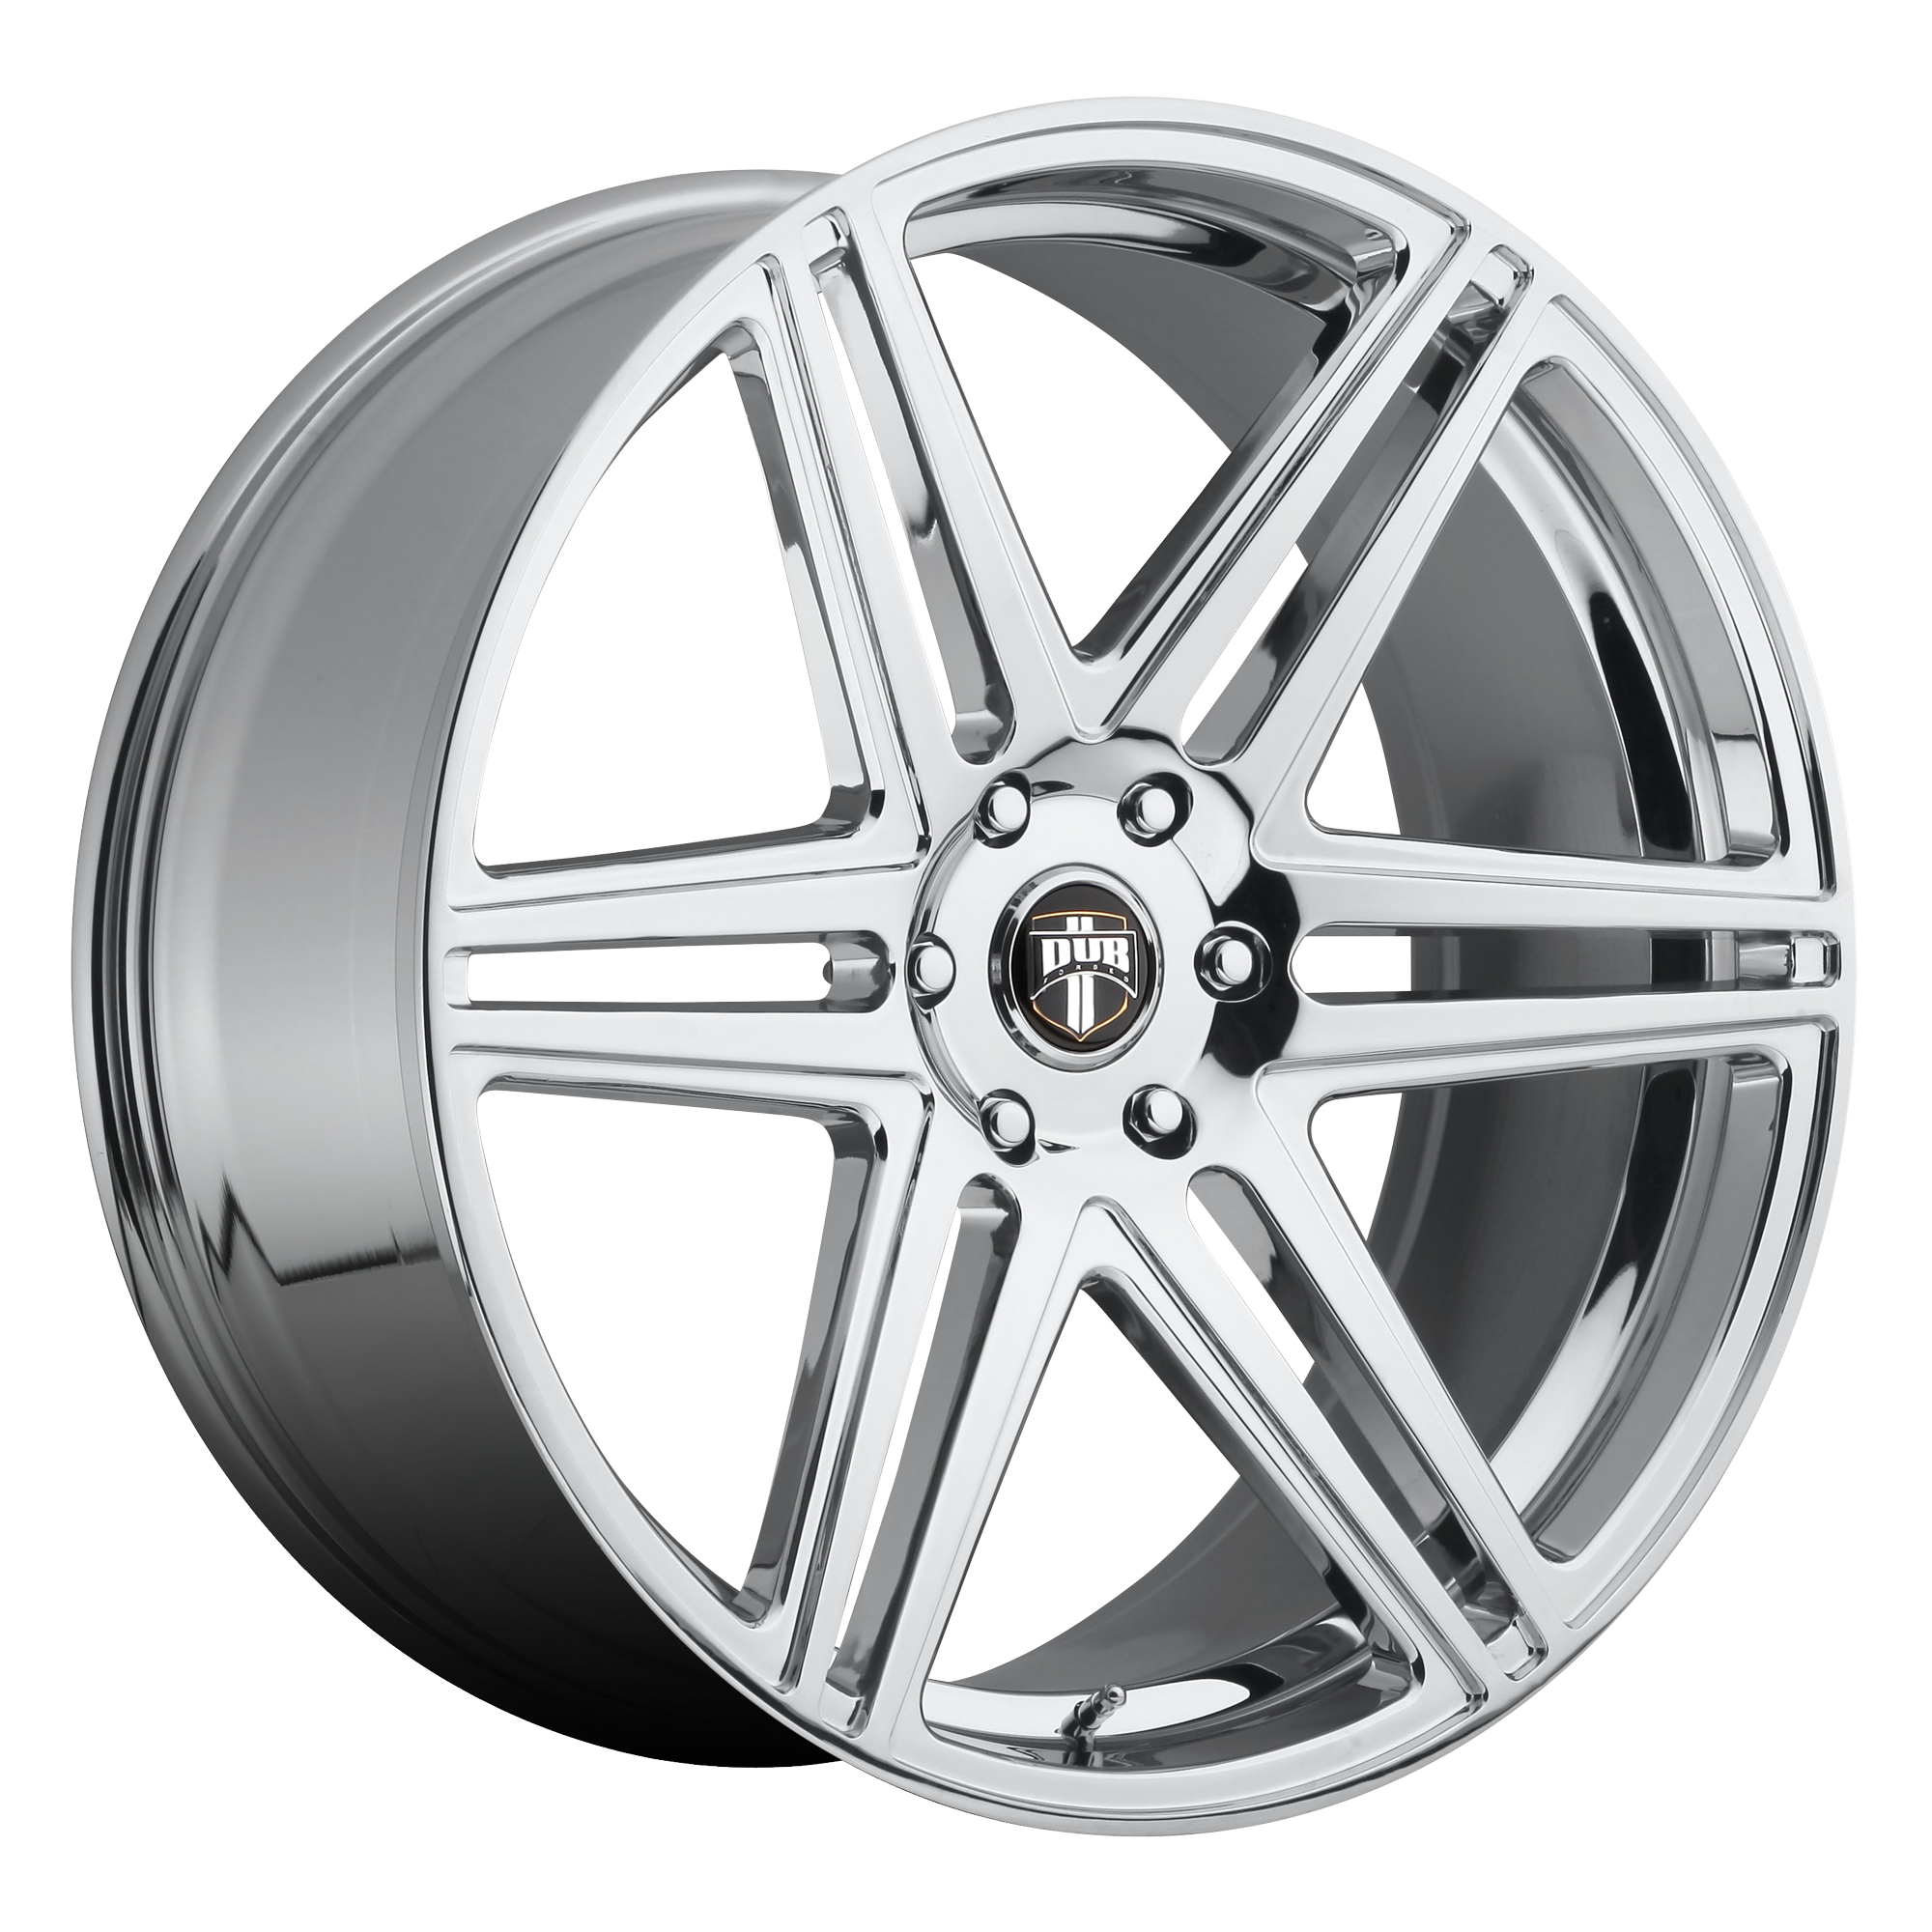 SKILLZ 22x9.5 6x139.70 CHROME PLATED (30 mm) - Tires and Engine Performance